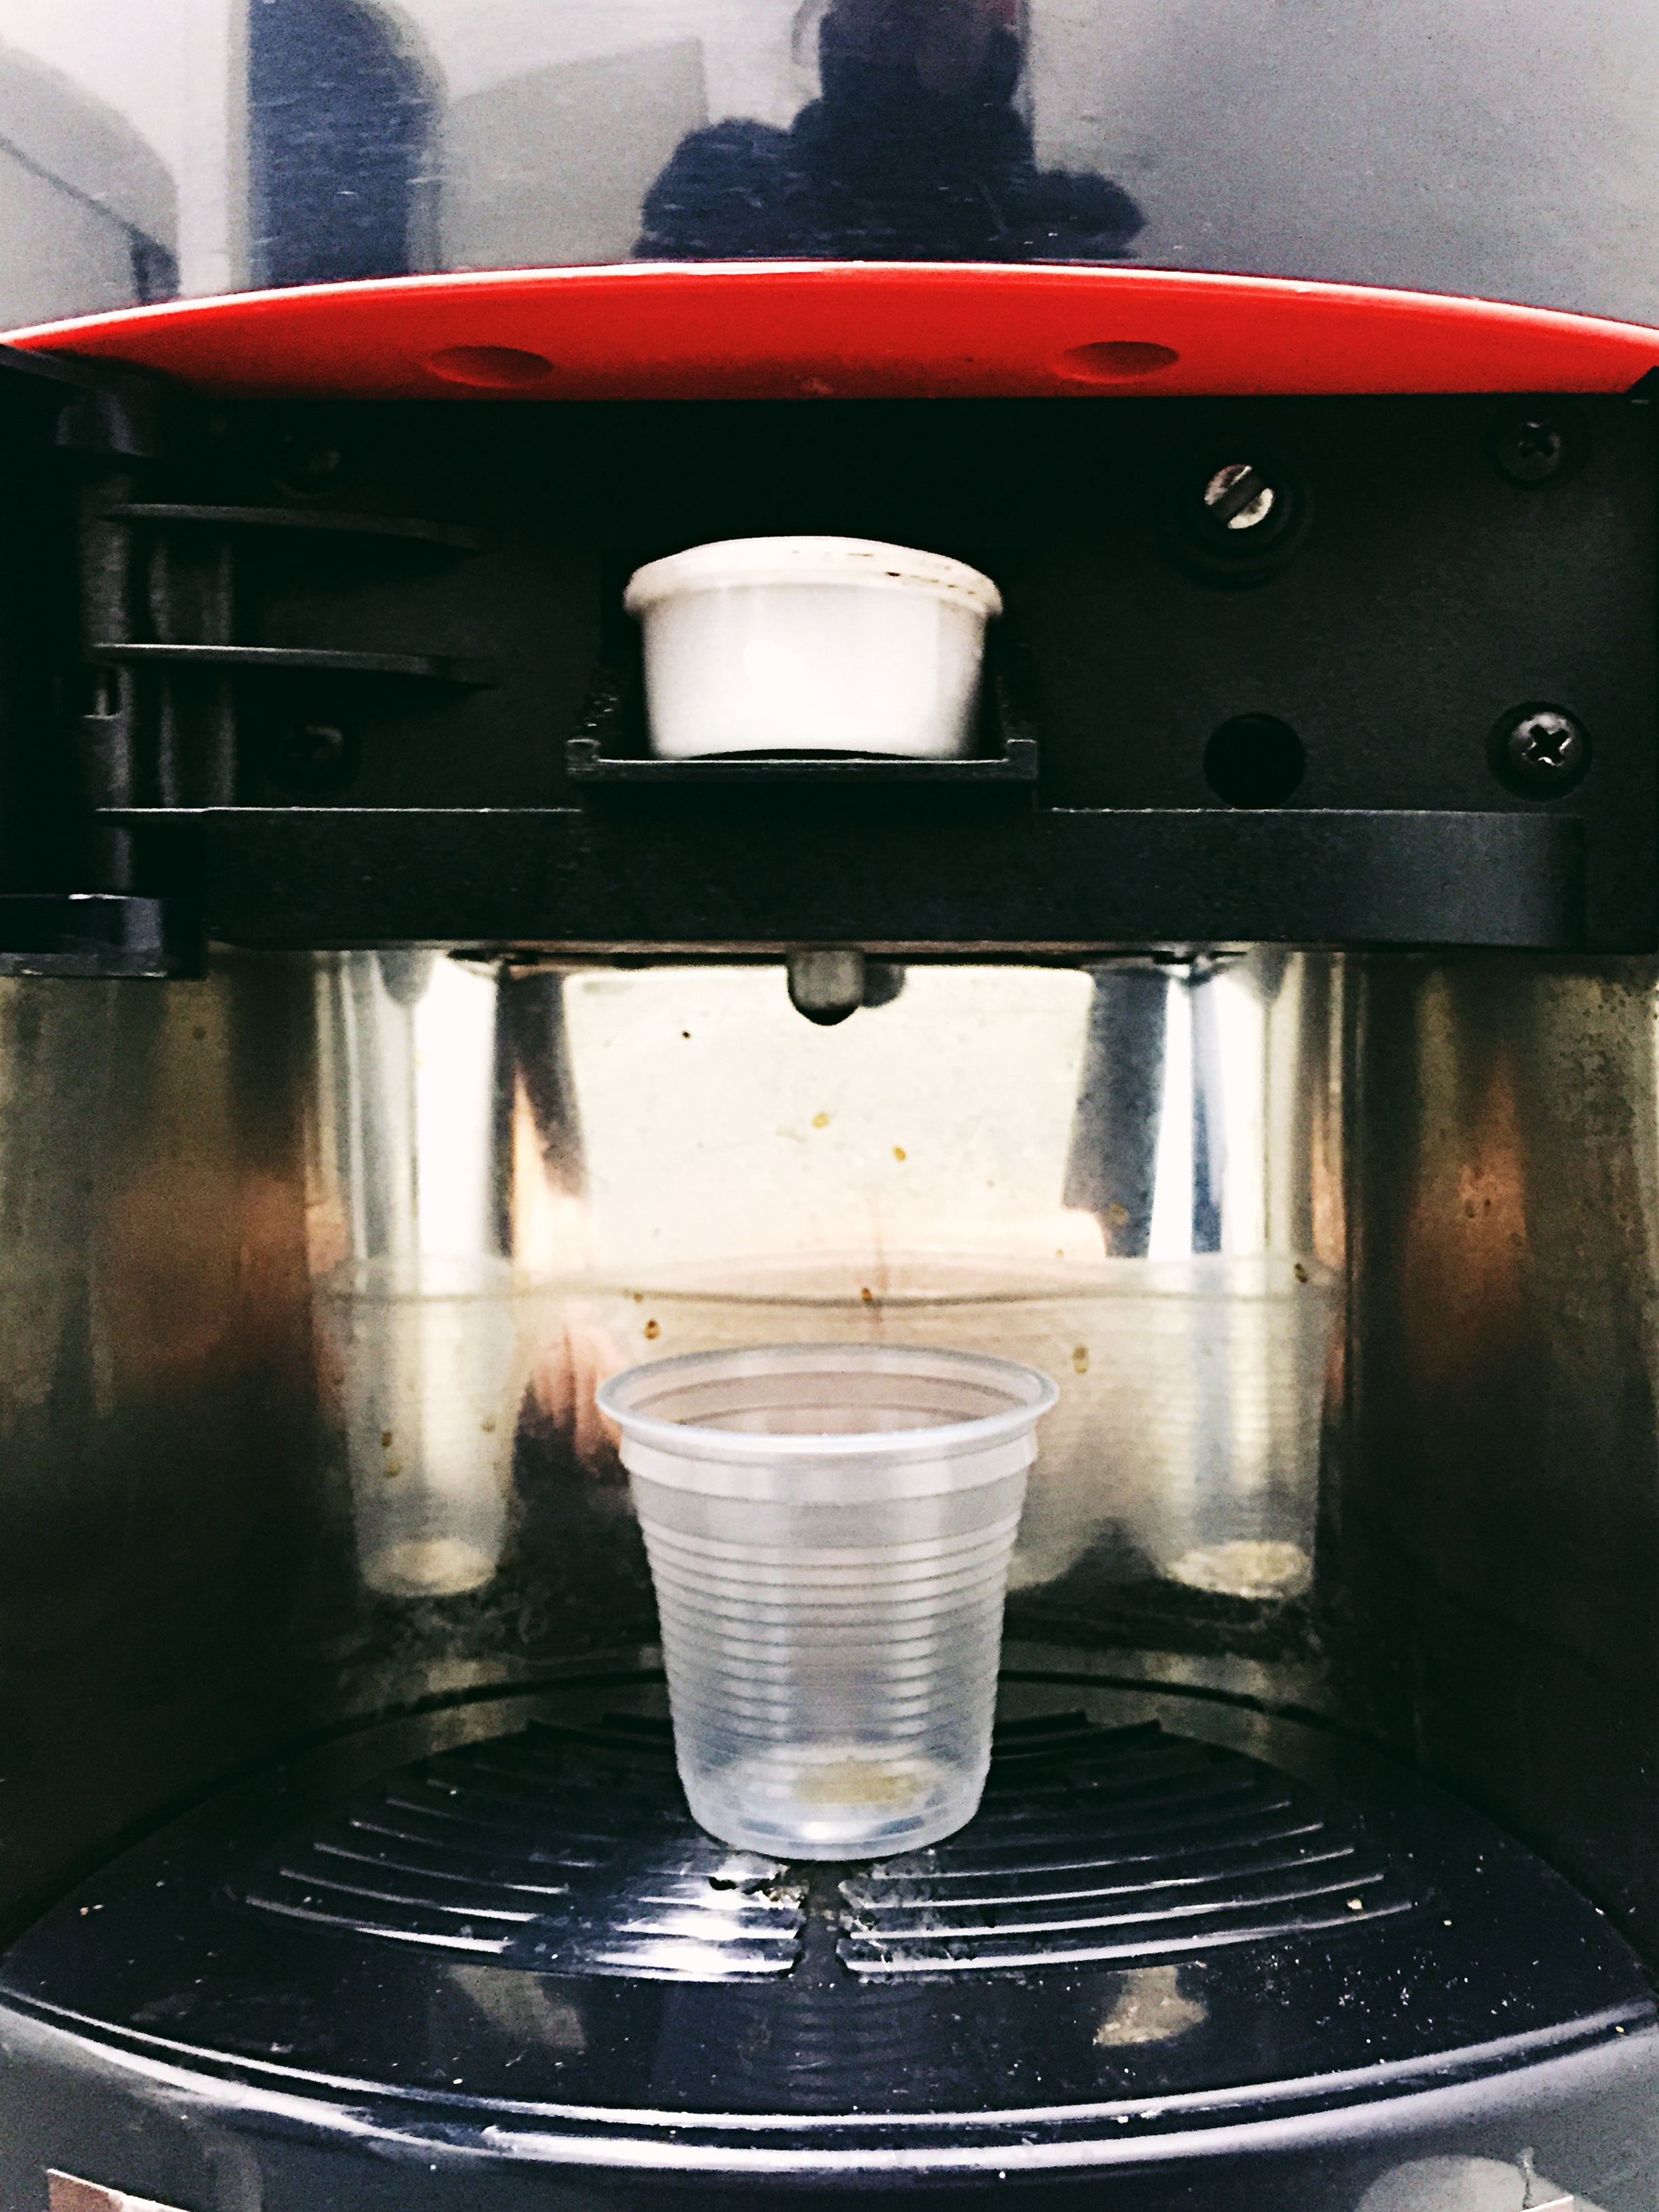 A little cup in a coffee maker